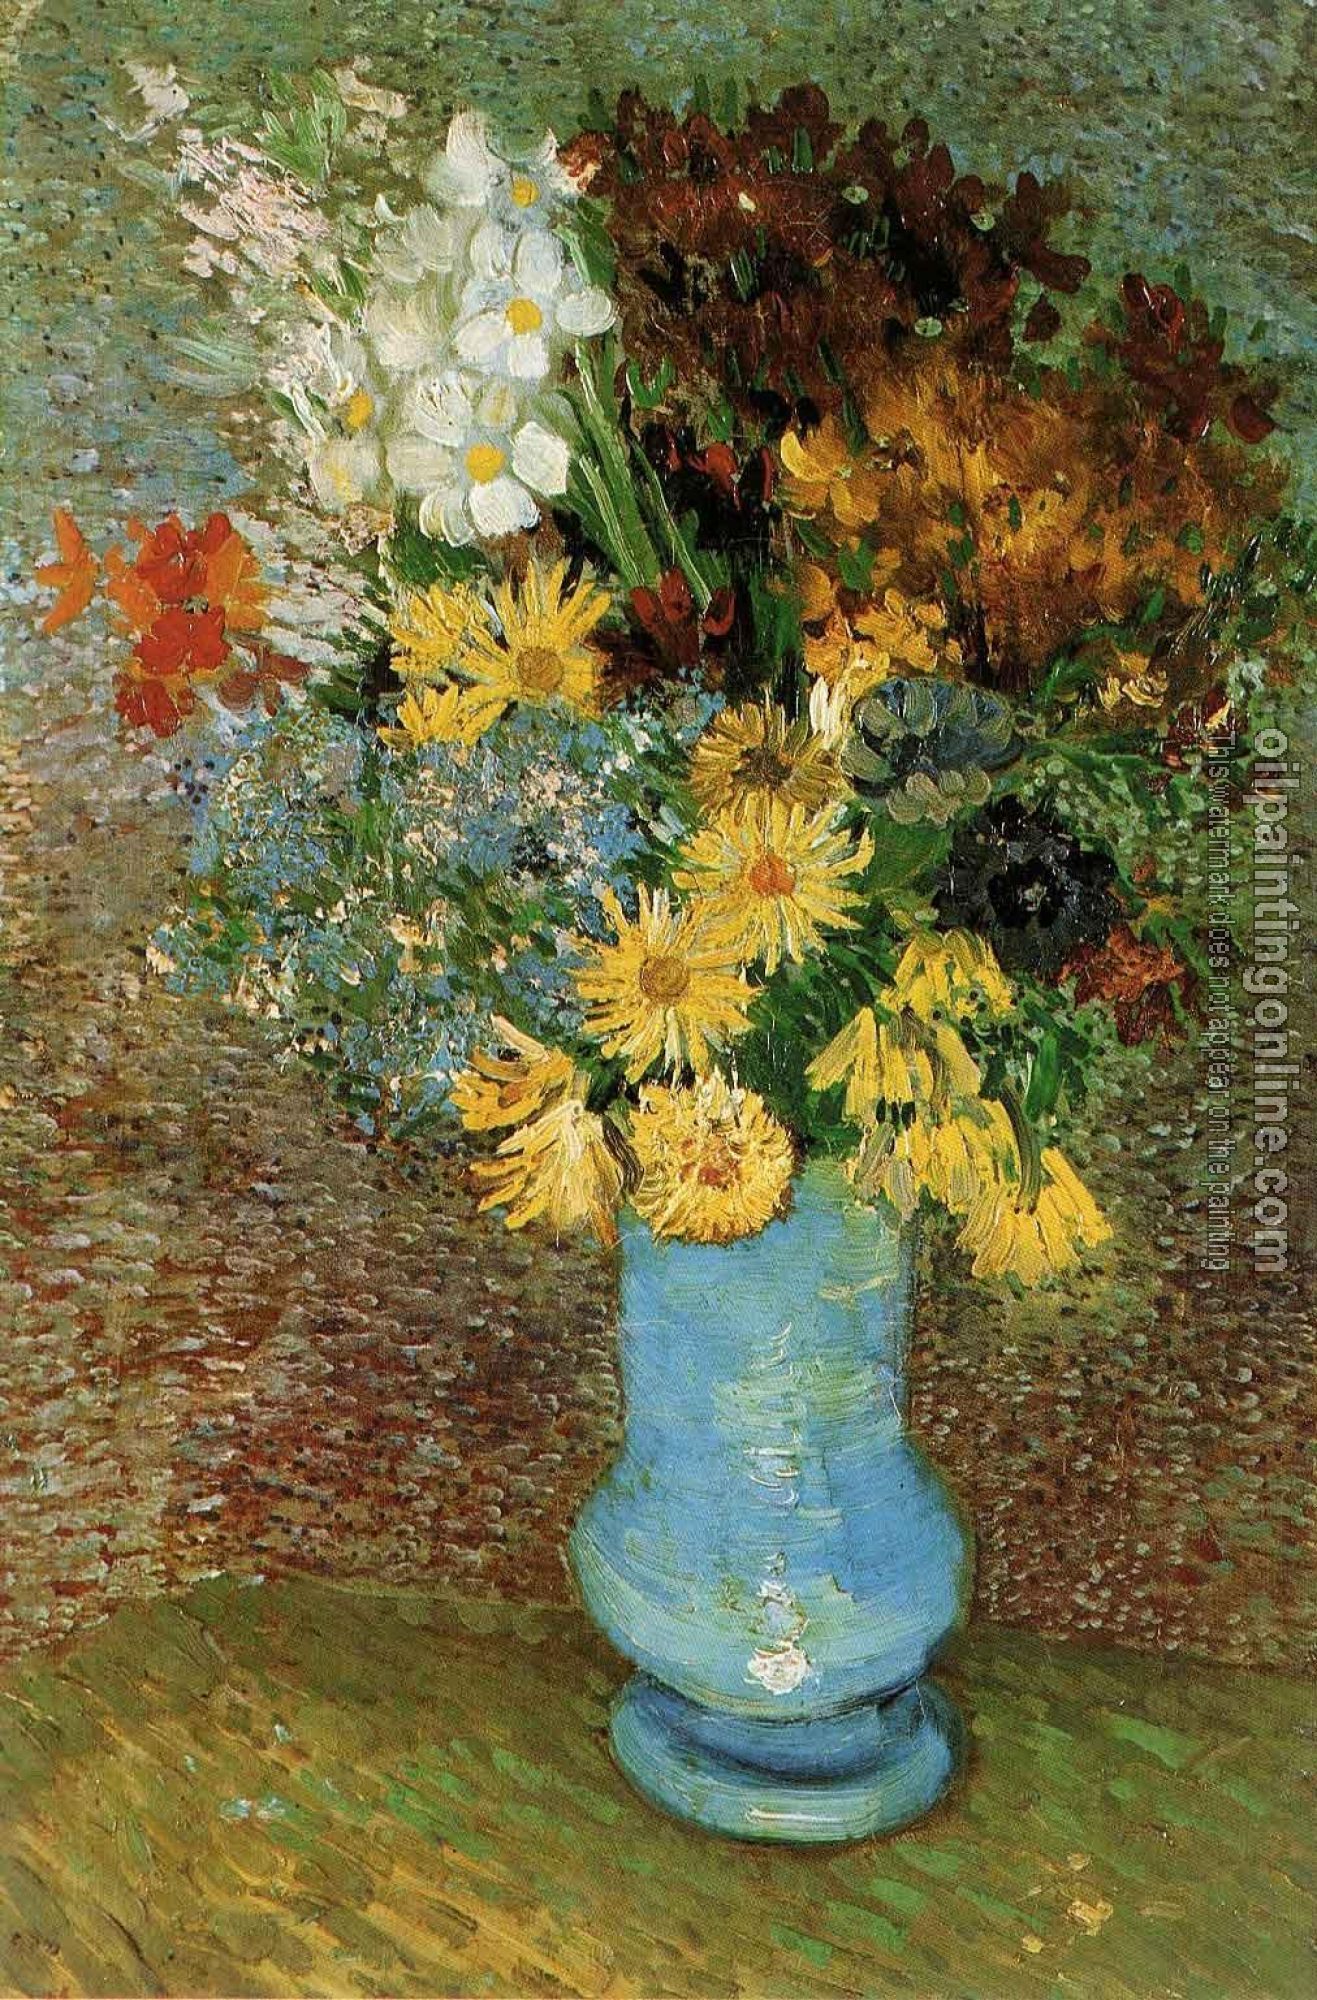 Gogh, Vincent van - Vase with Daisies and Anemones